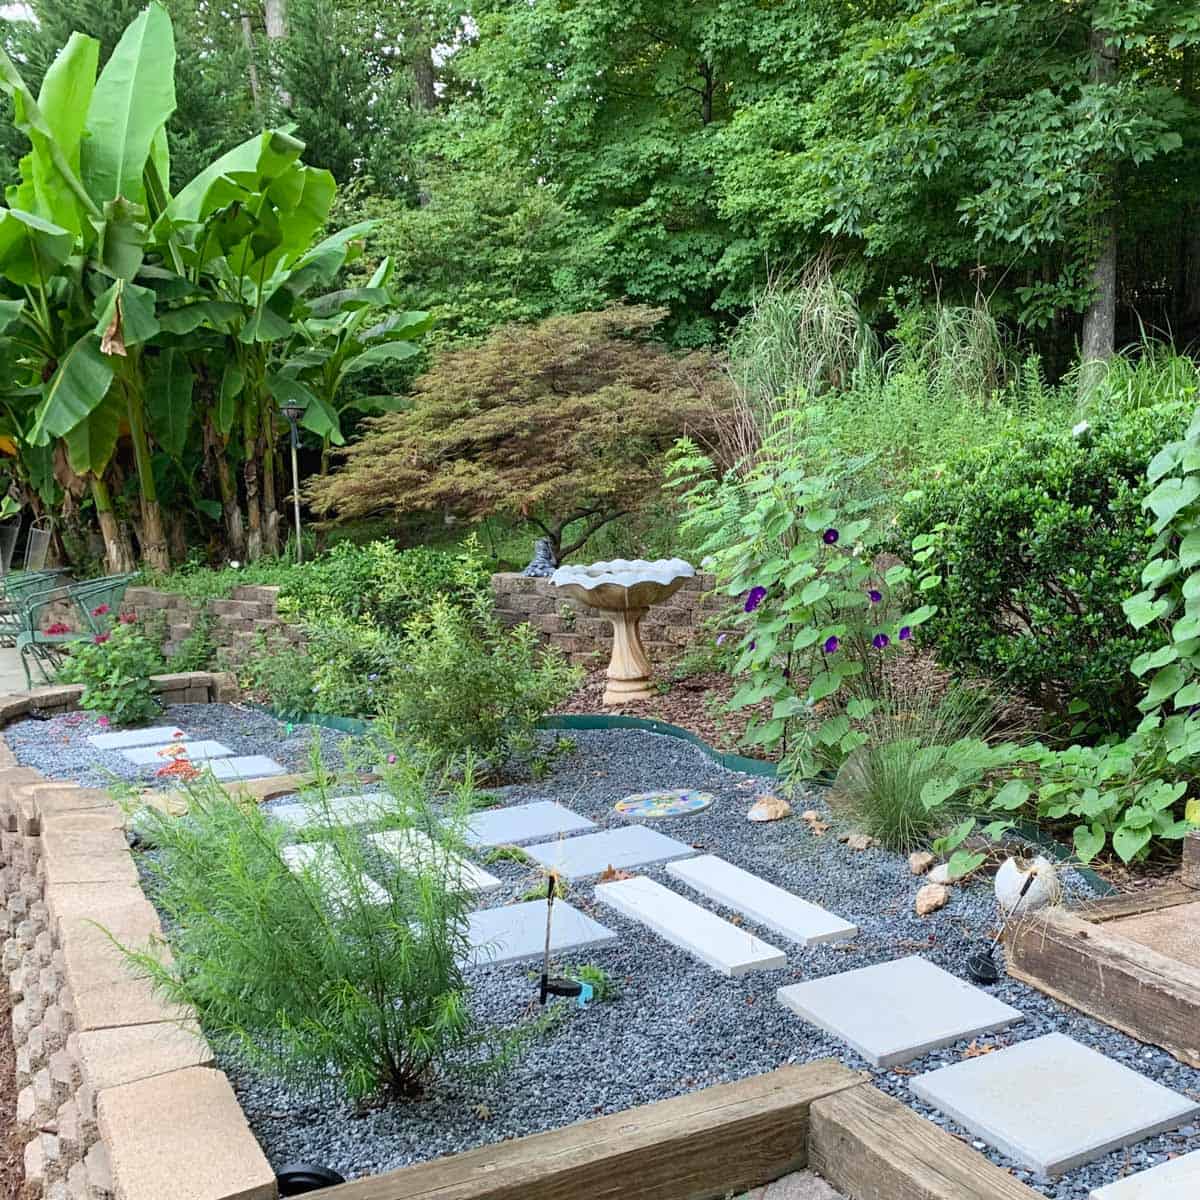 garden filled with gravel, planted with lush plants and step-ins stones with vegetation between.